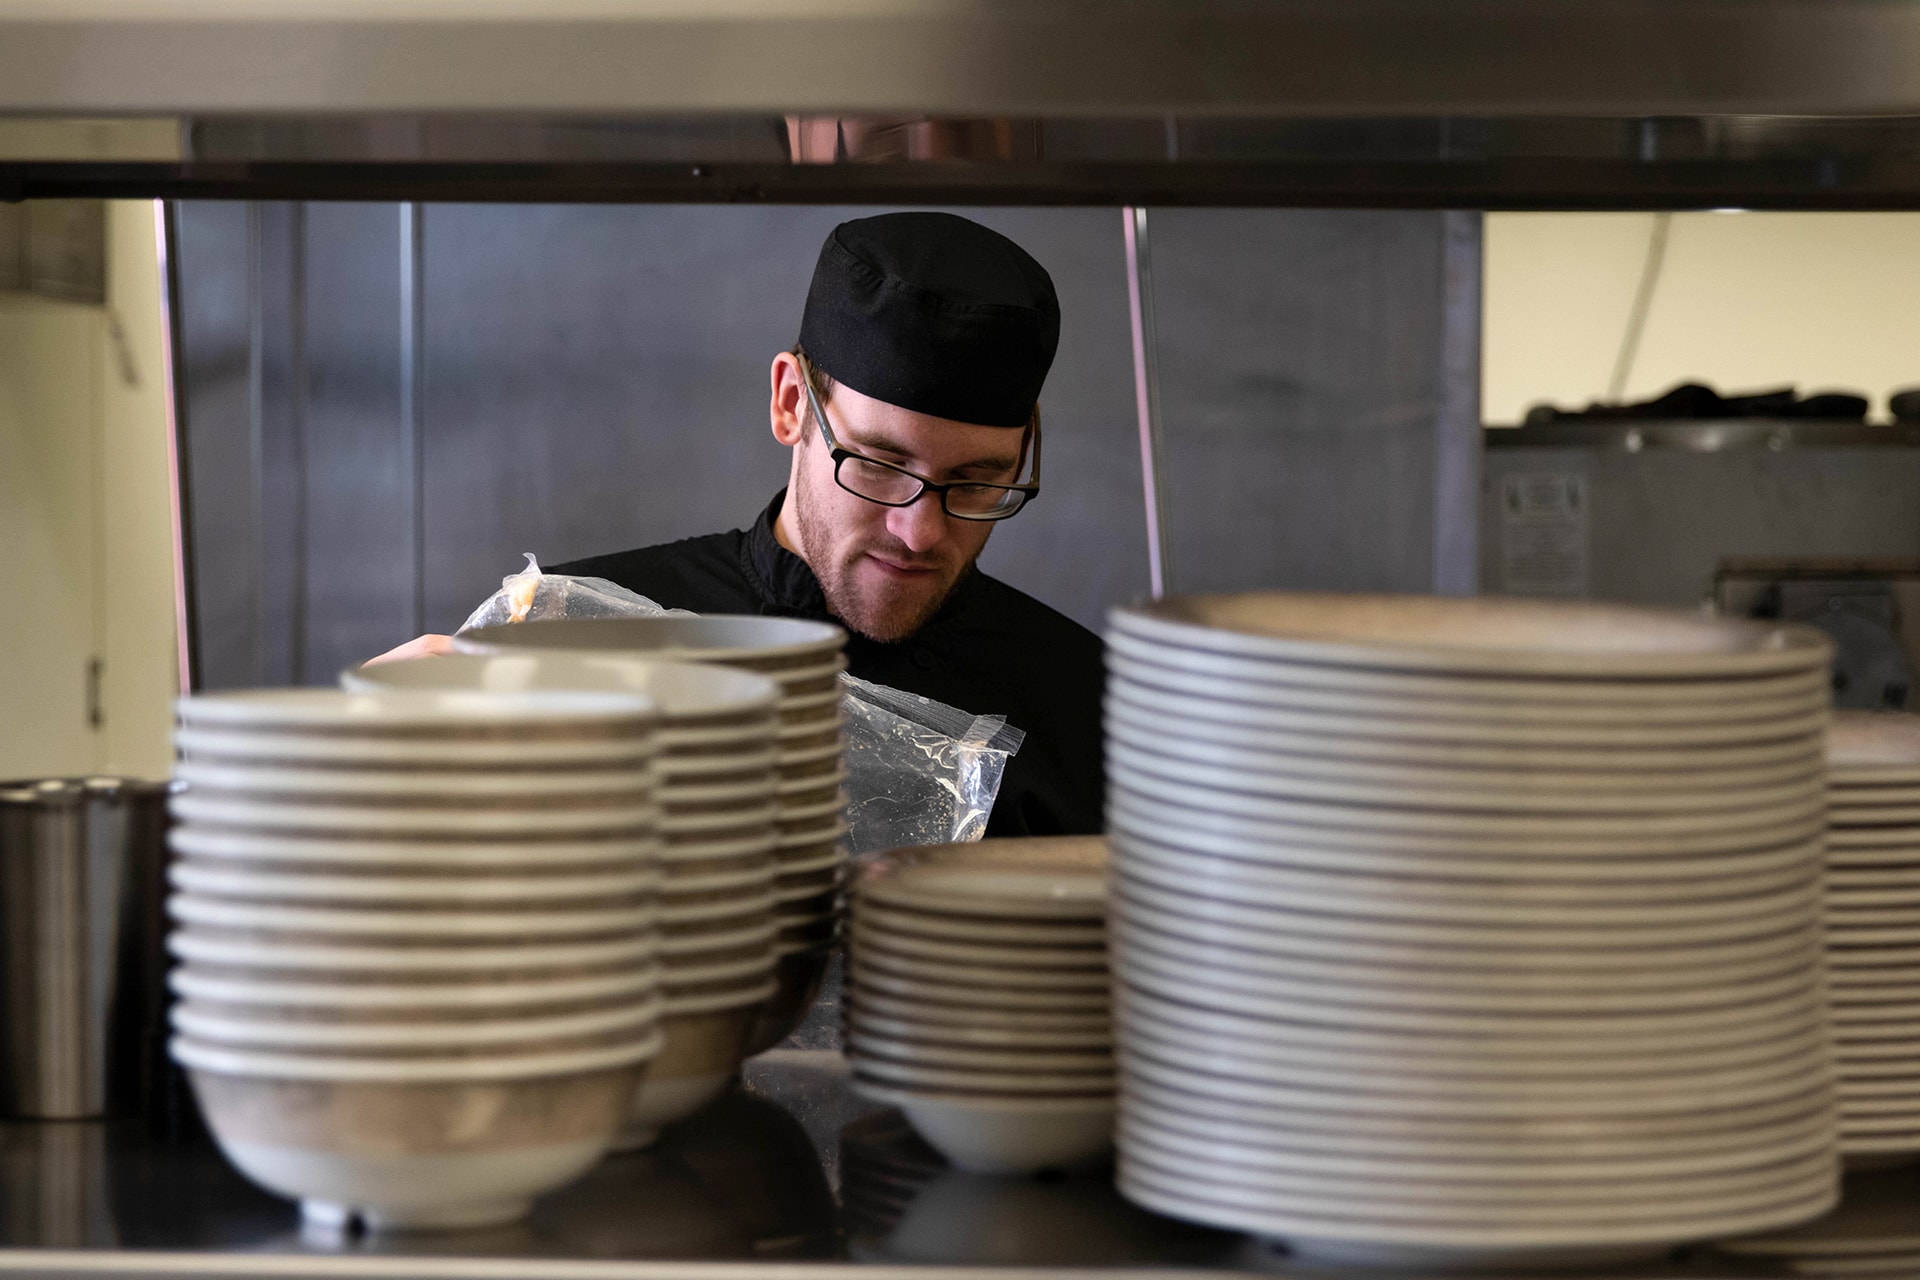 A chef stands behnind stacks of plates